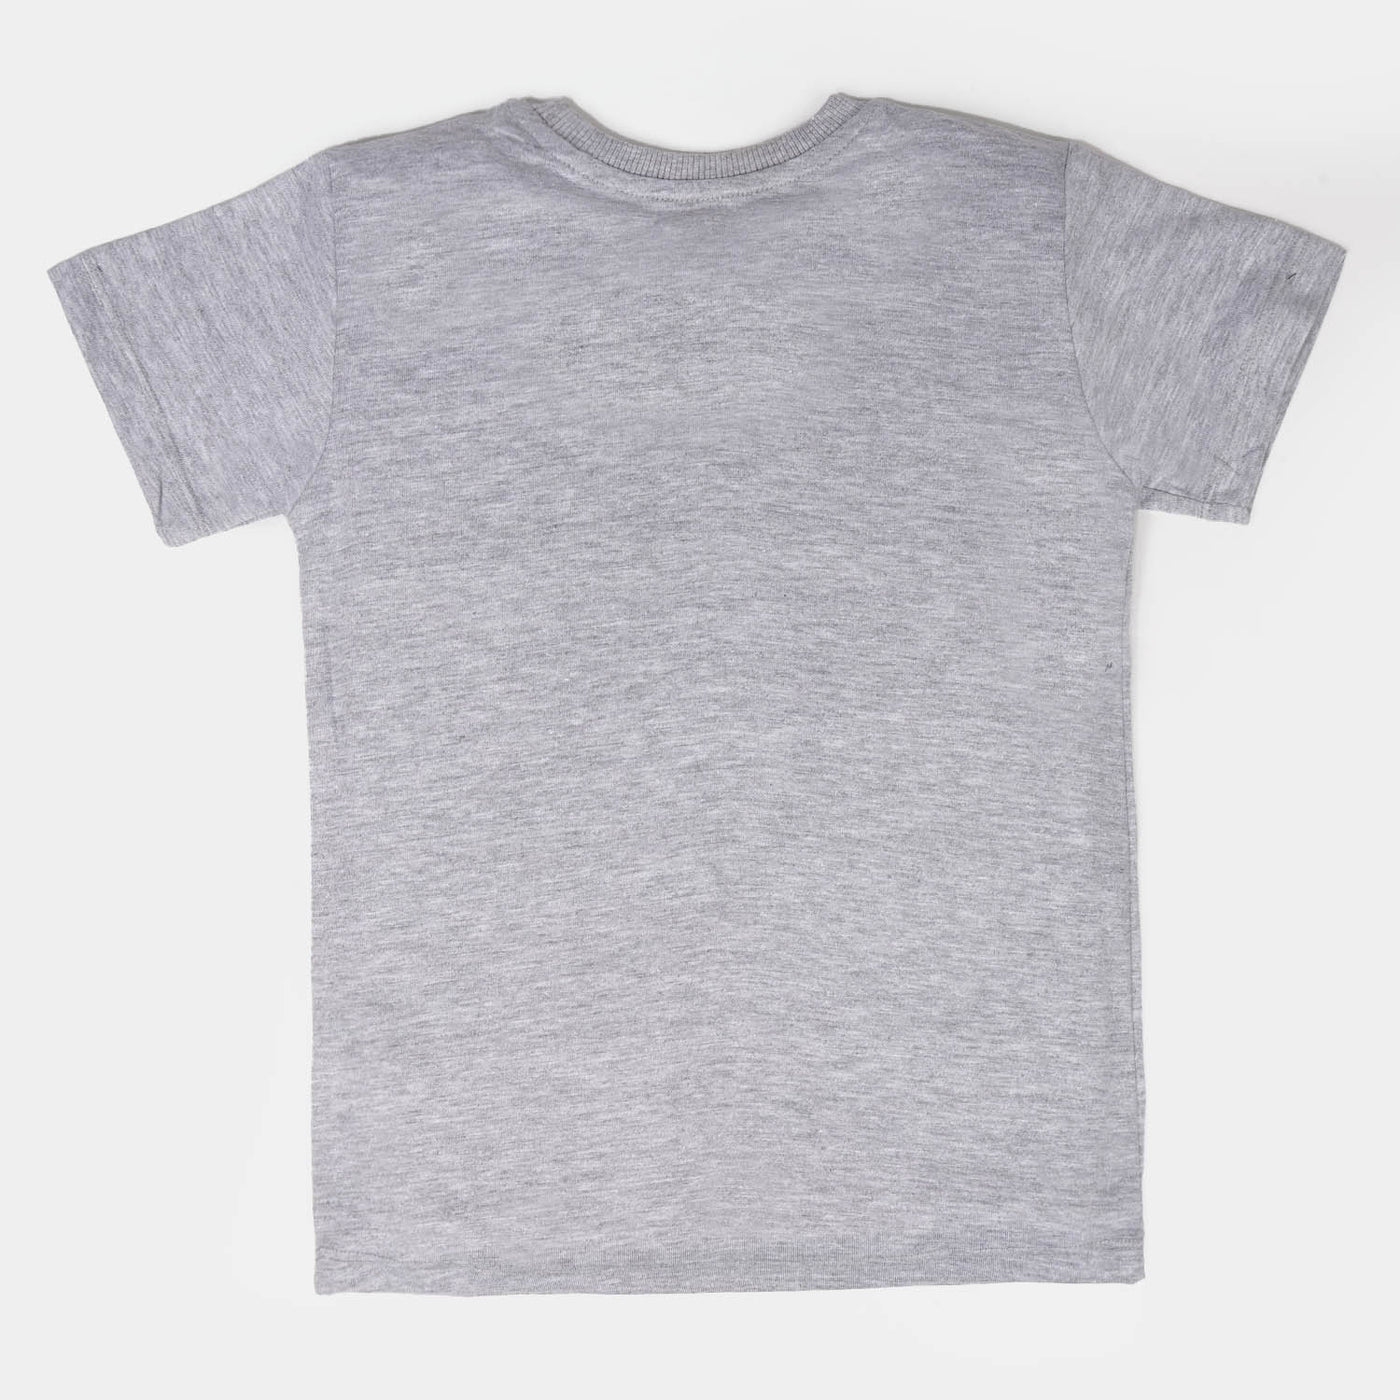 Boys Knitted Night Wear Character - Grey